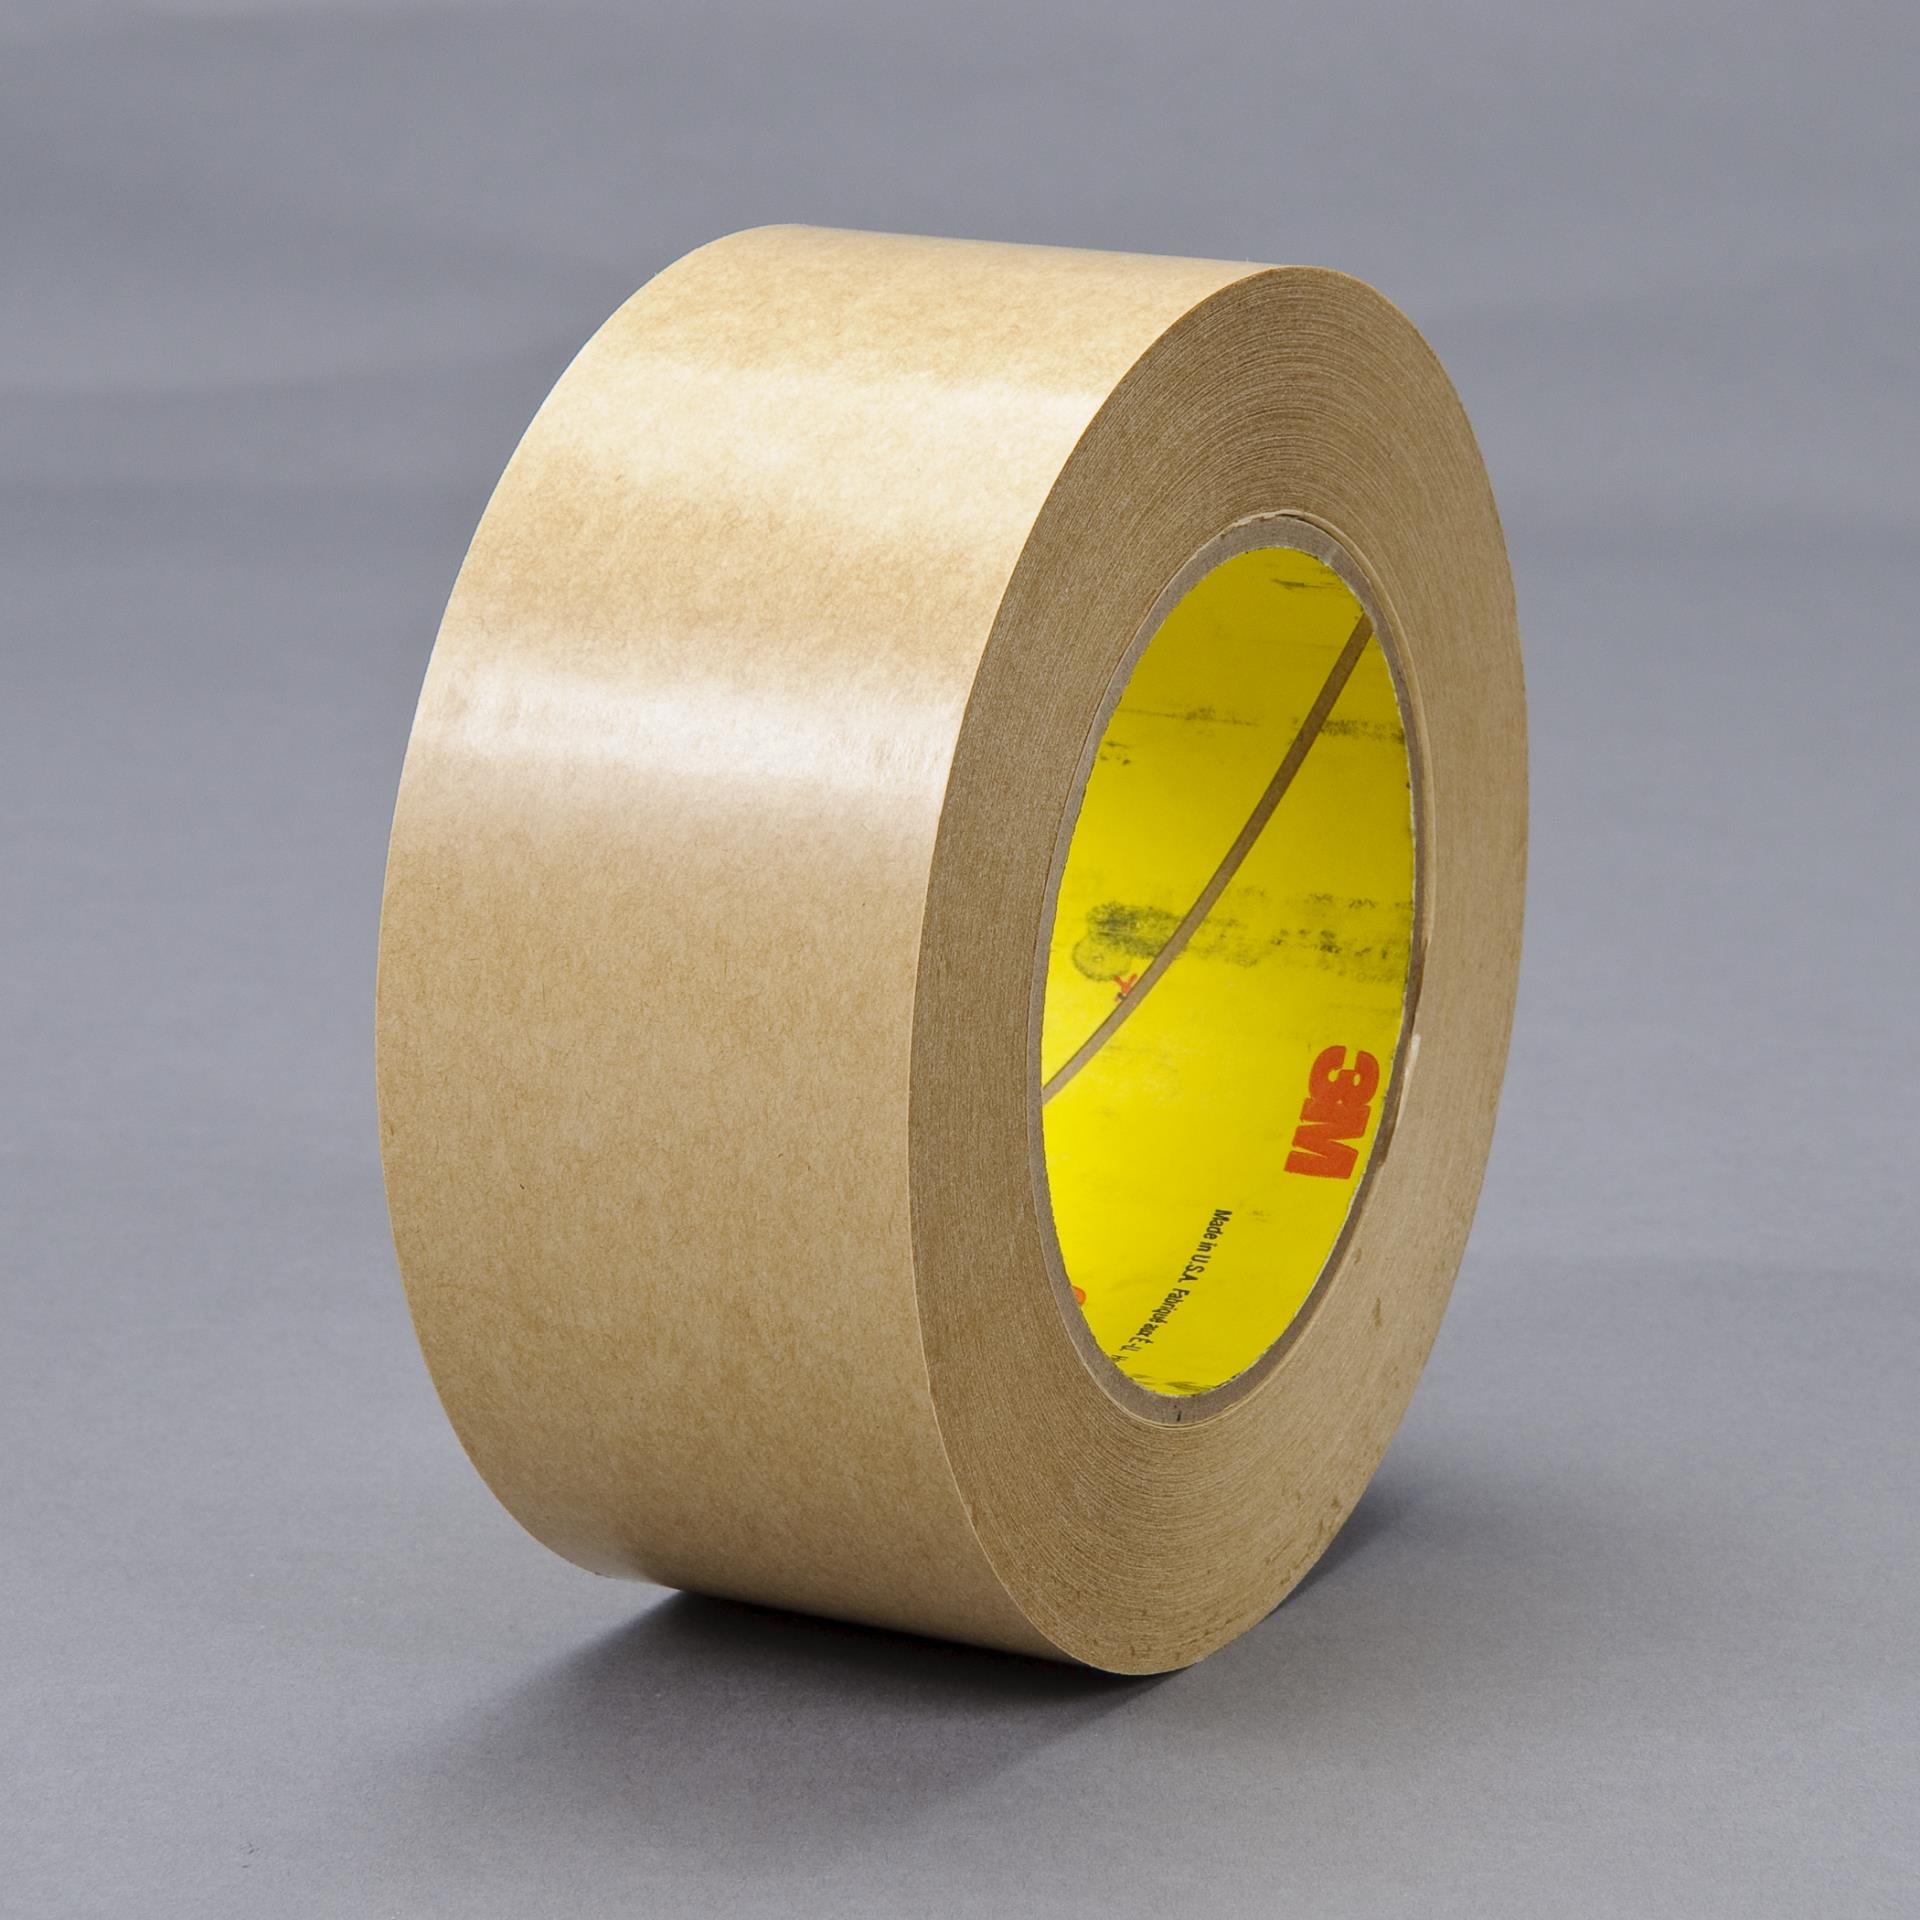 3M 9629PC CIRCLE-2.000-100 Double Coated Tape 2 Diameter Circle Roll of 100